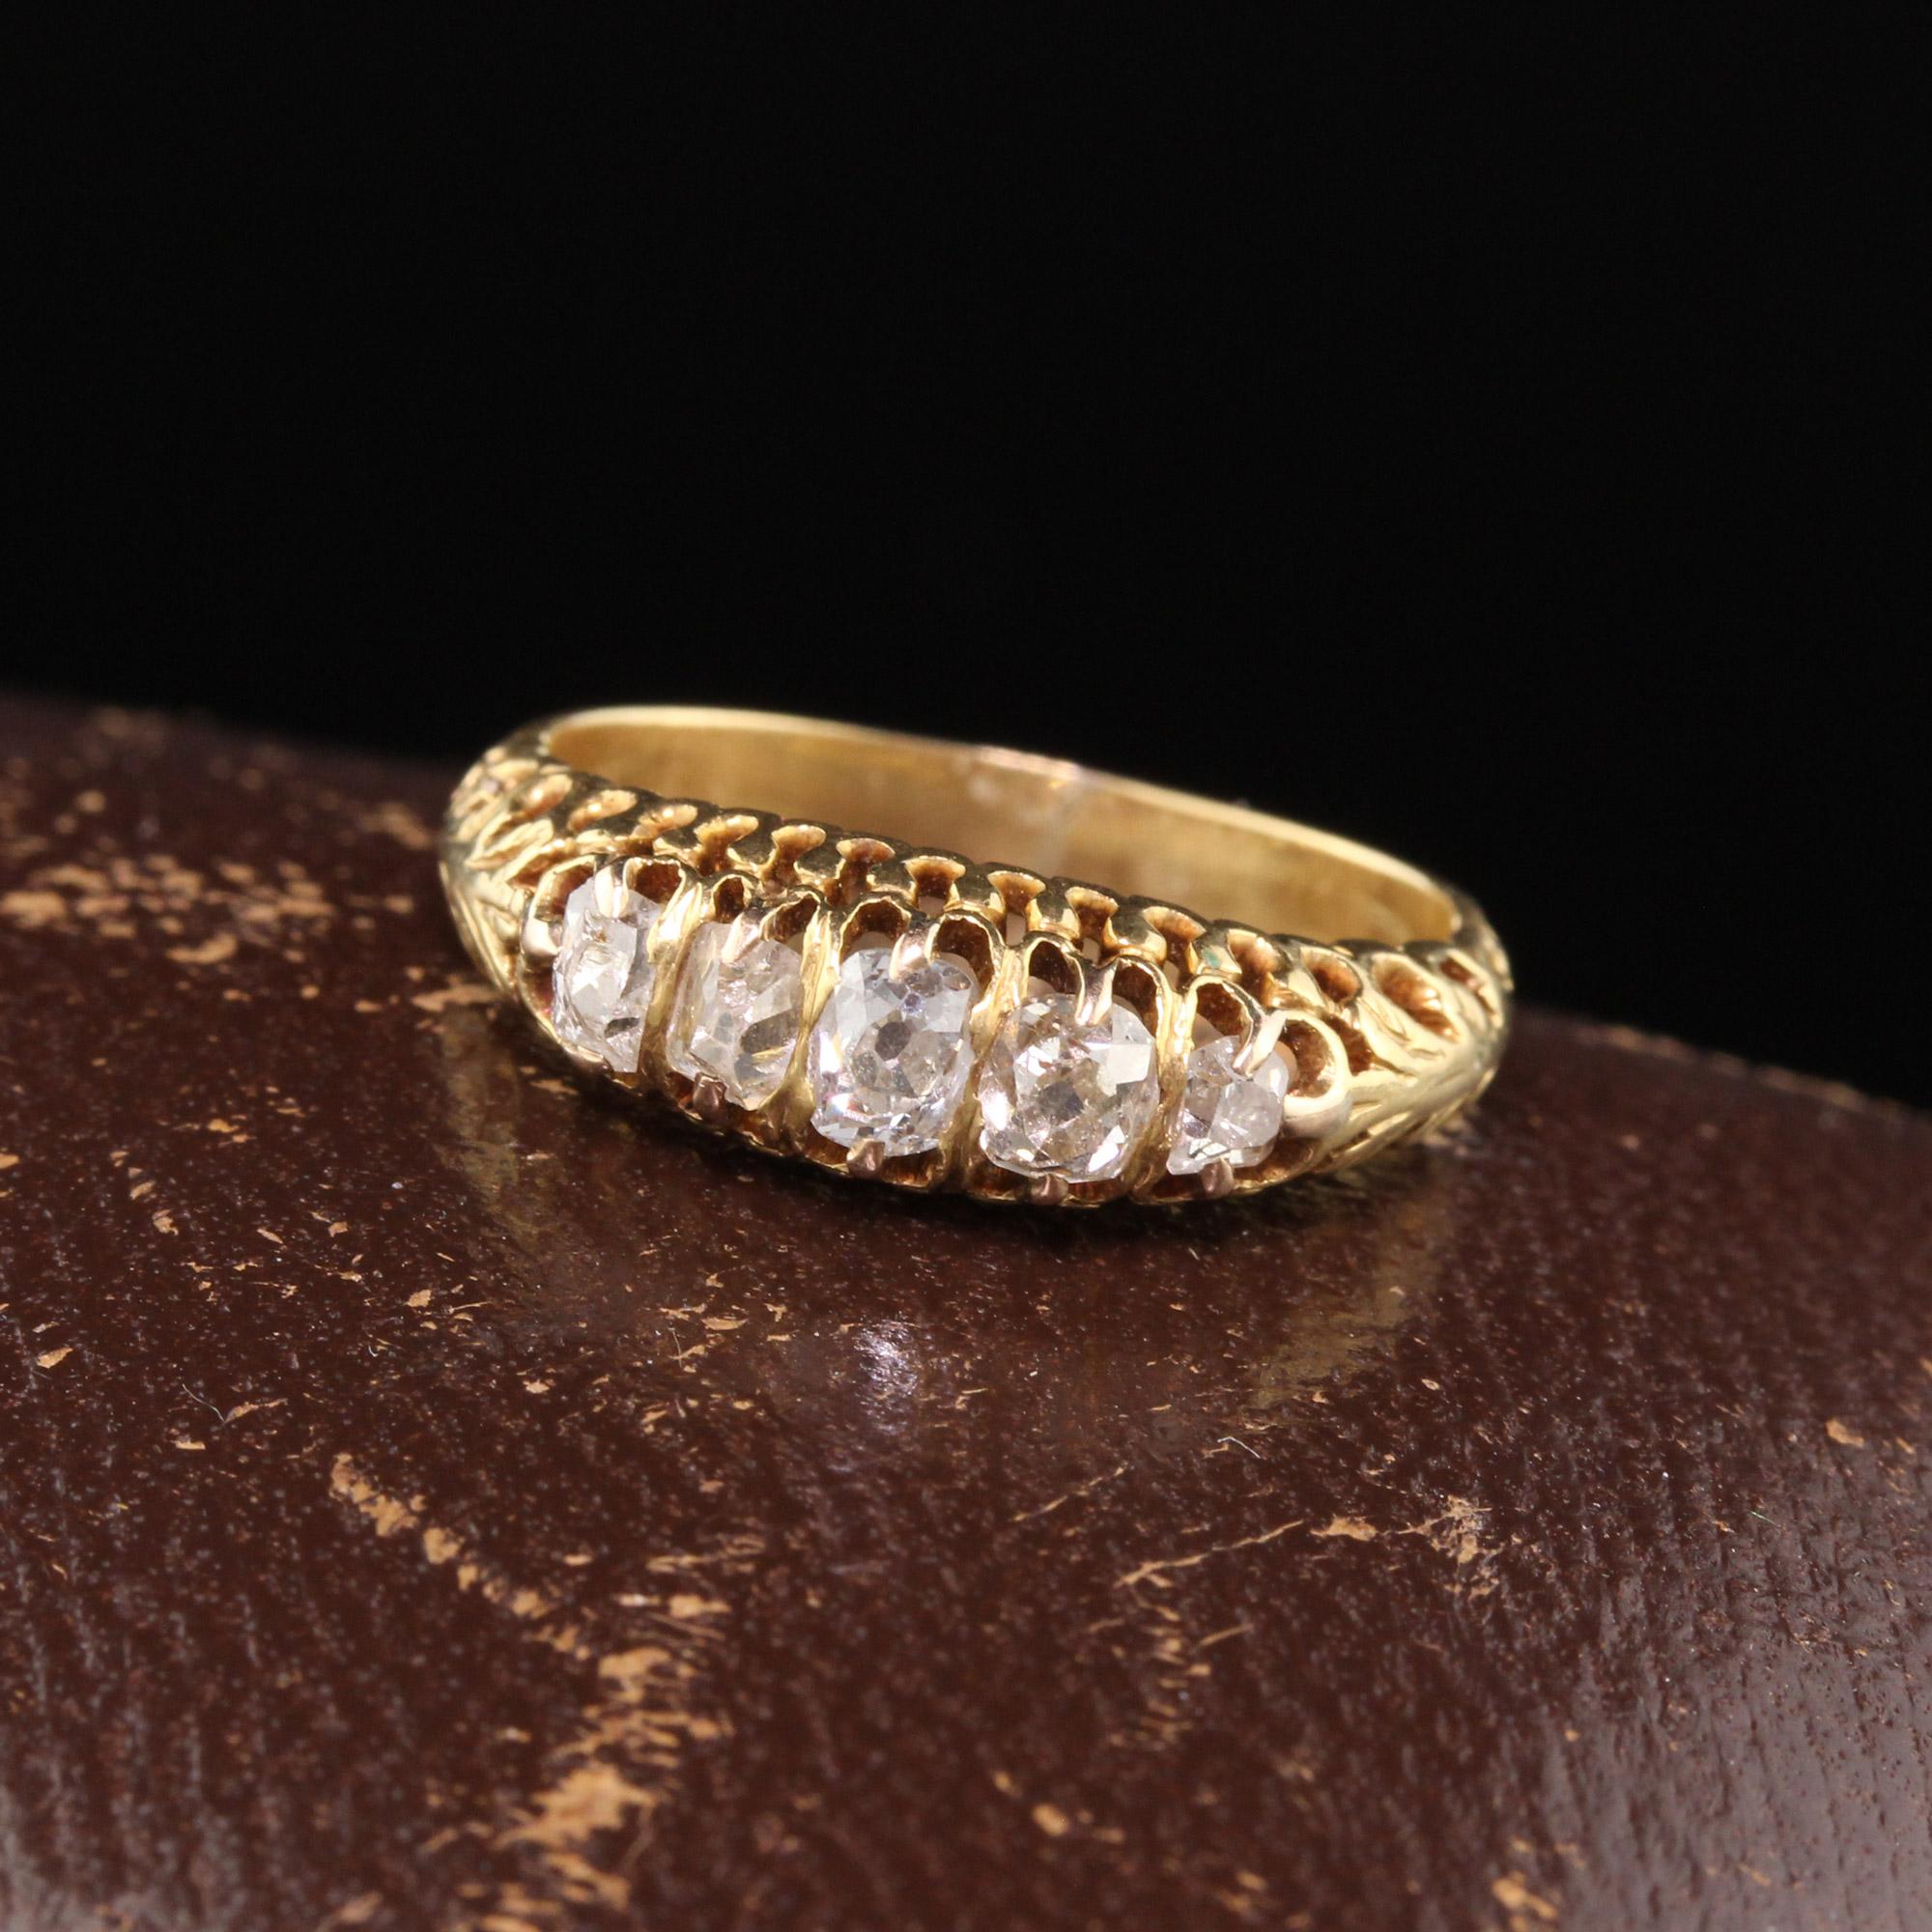 Beautiful classic Victorian half hoop band in yellow gold with 5 graduating old mine cut diamonds. The perfect wedding band or anniversary band!

#R0355

Metal: 18K Yellow Gold 

Weight: 2.9 Grams

Total Diamond Weight: Approximately 0.60 cts old